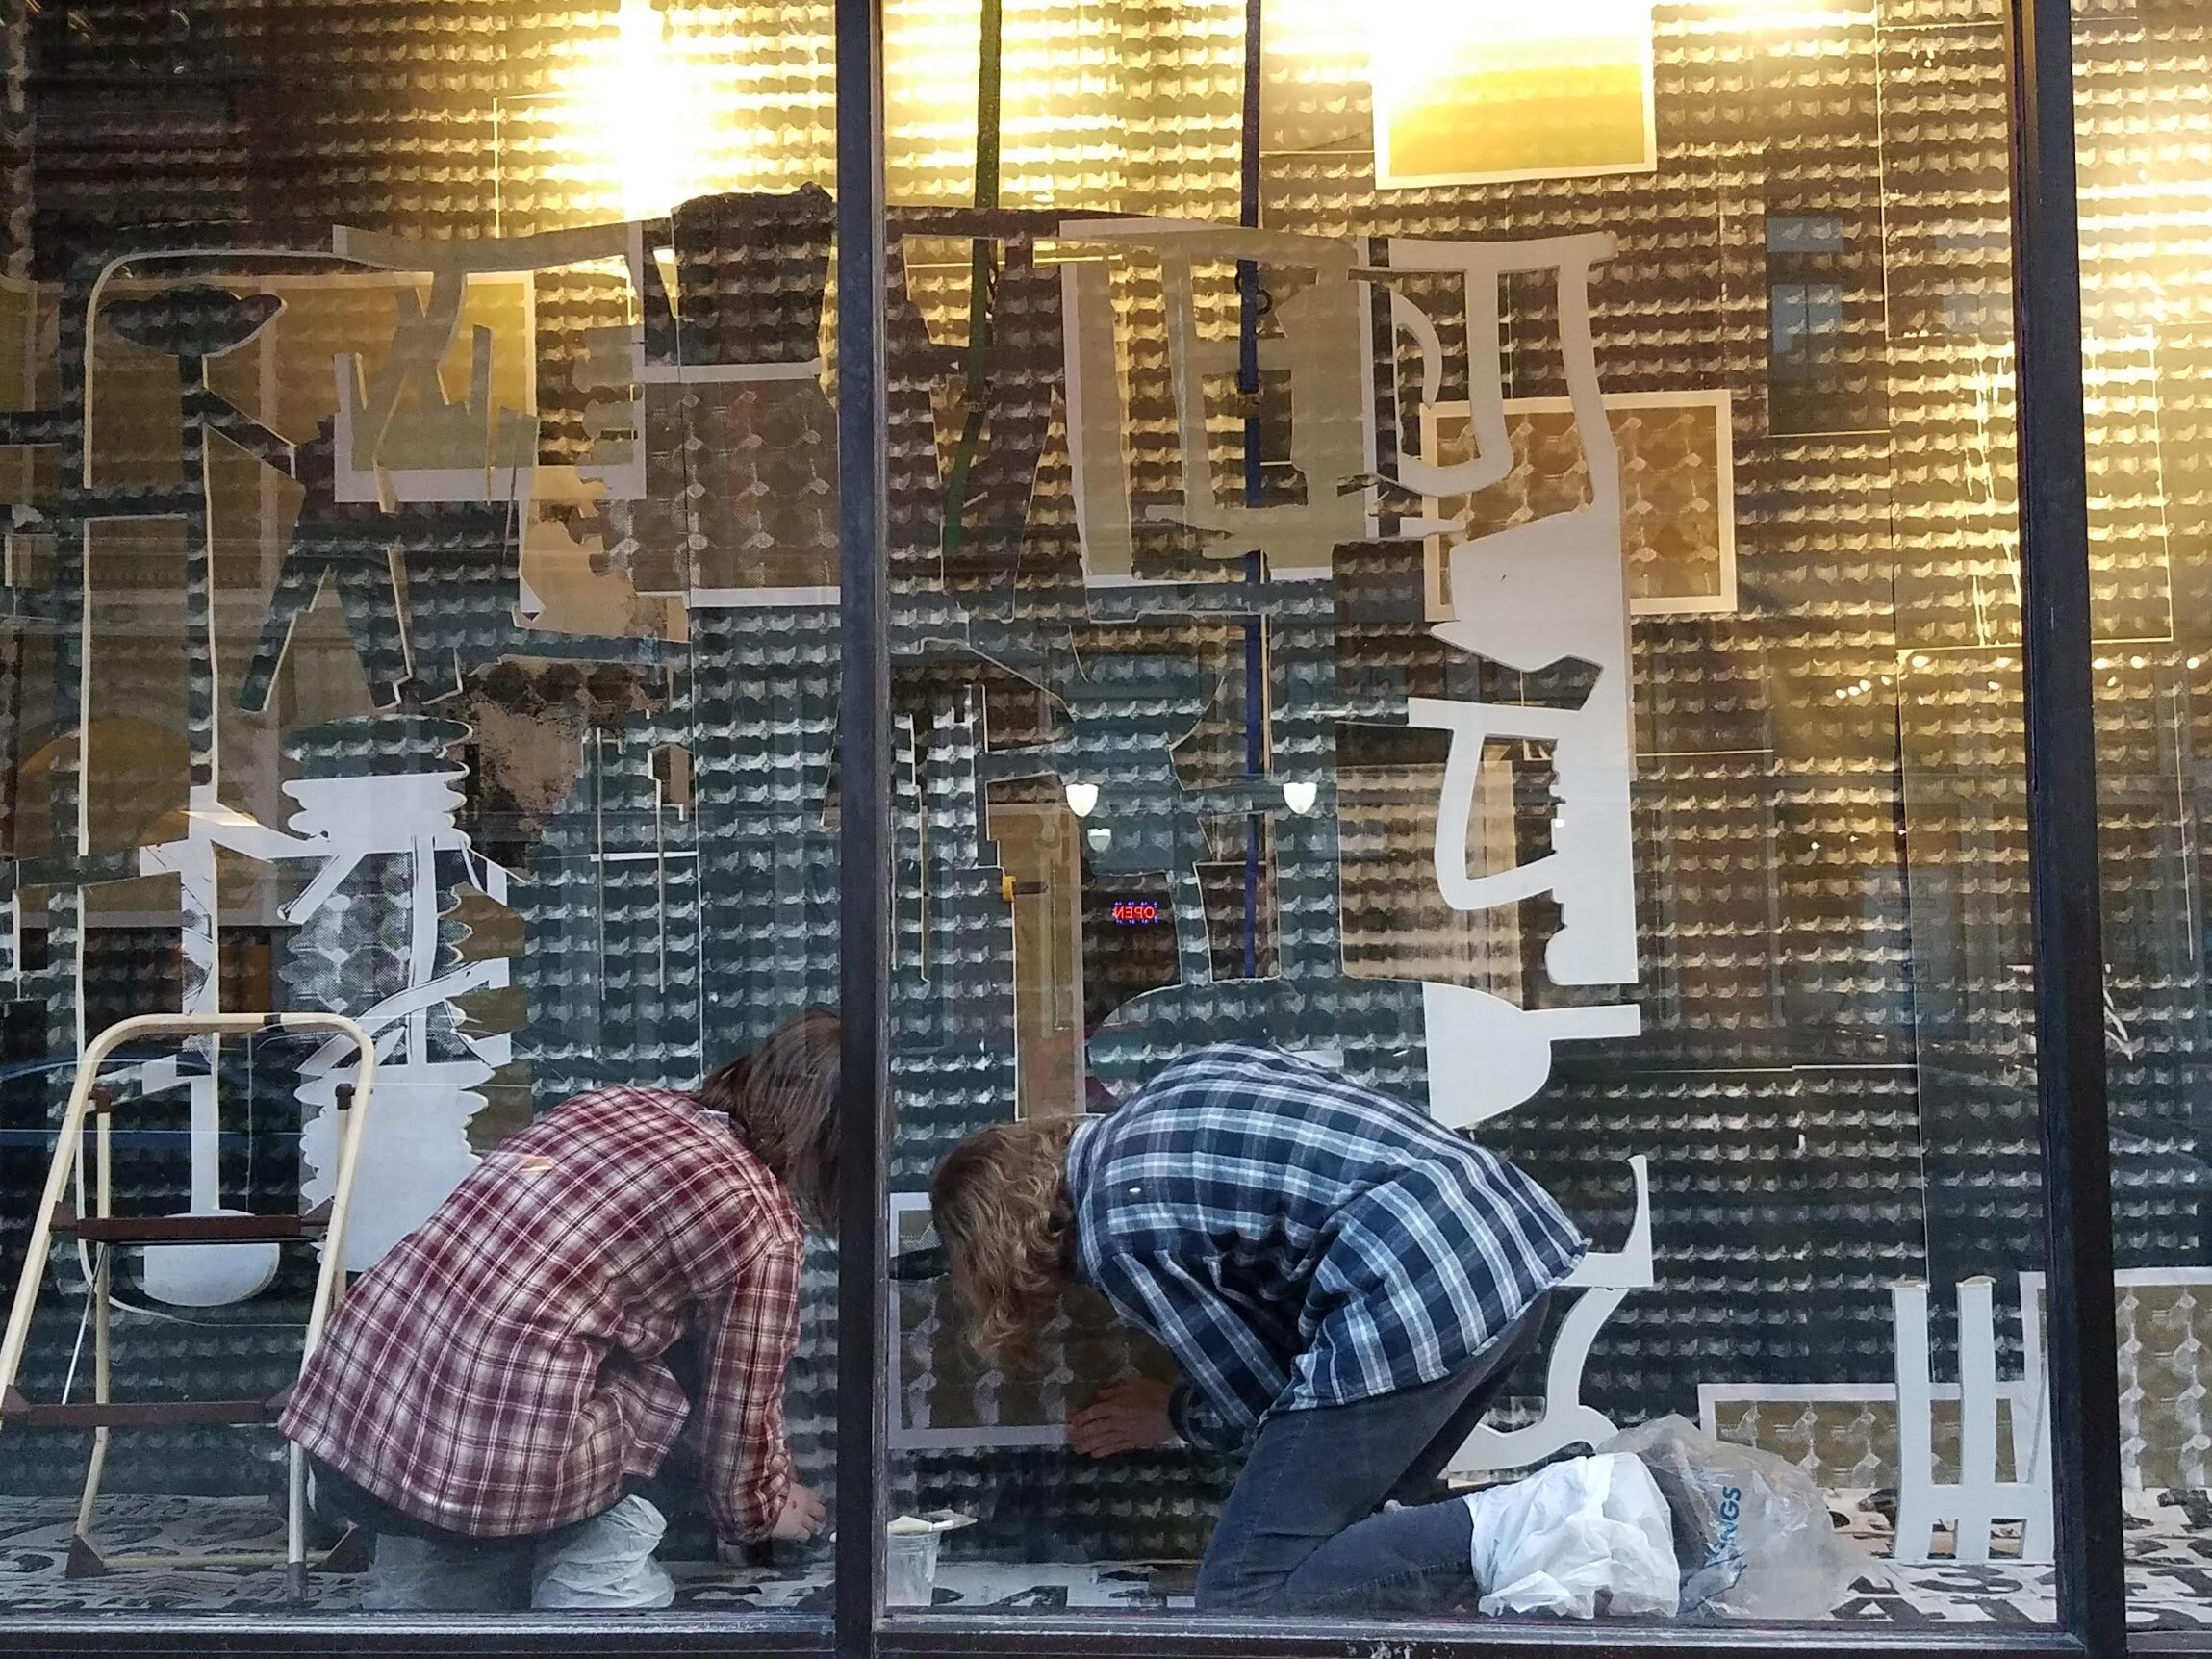 Assembly and installation of The Anatomy Lesson in SPACE gallery's window